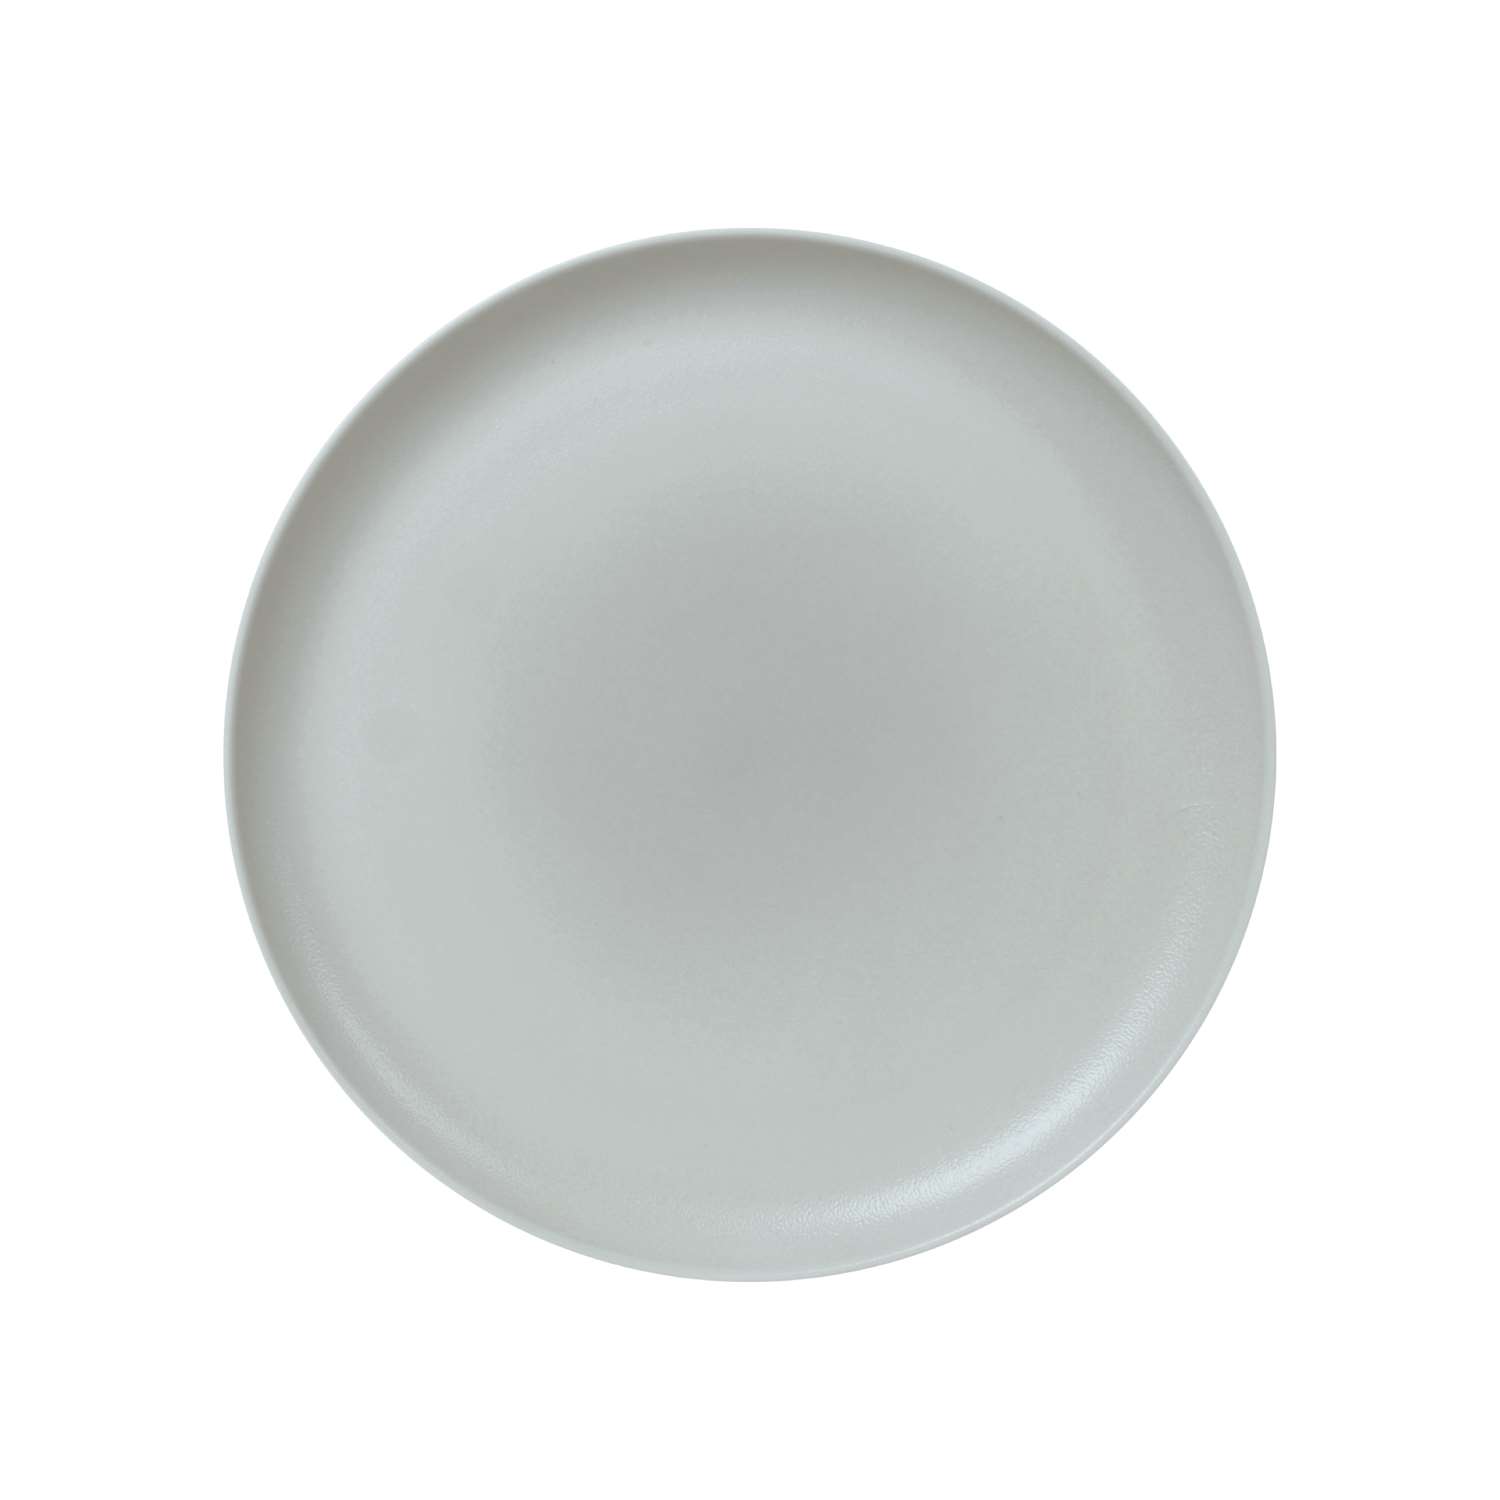 Baralee Light Grey Coupe Plate 21 Cm